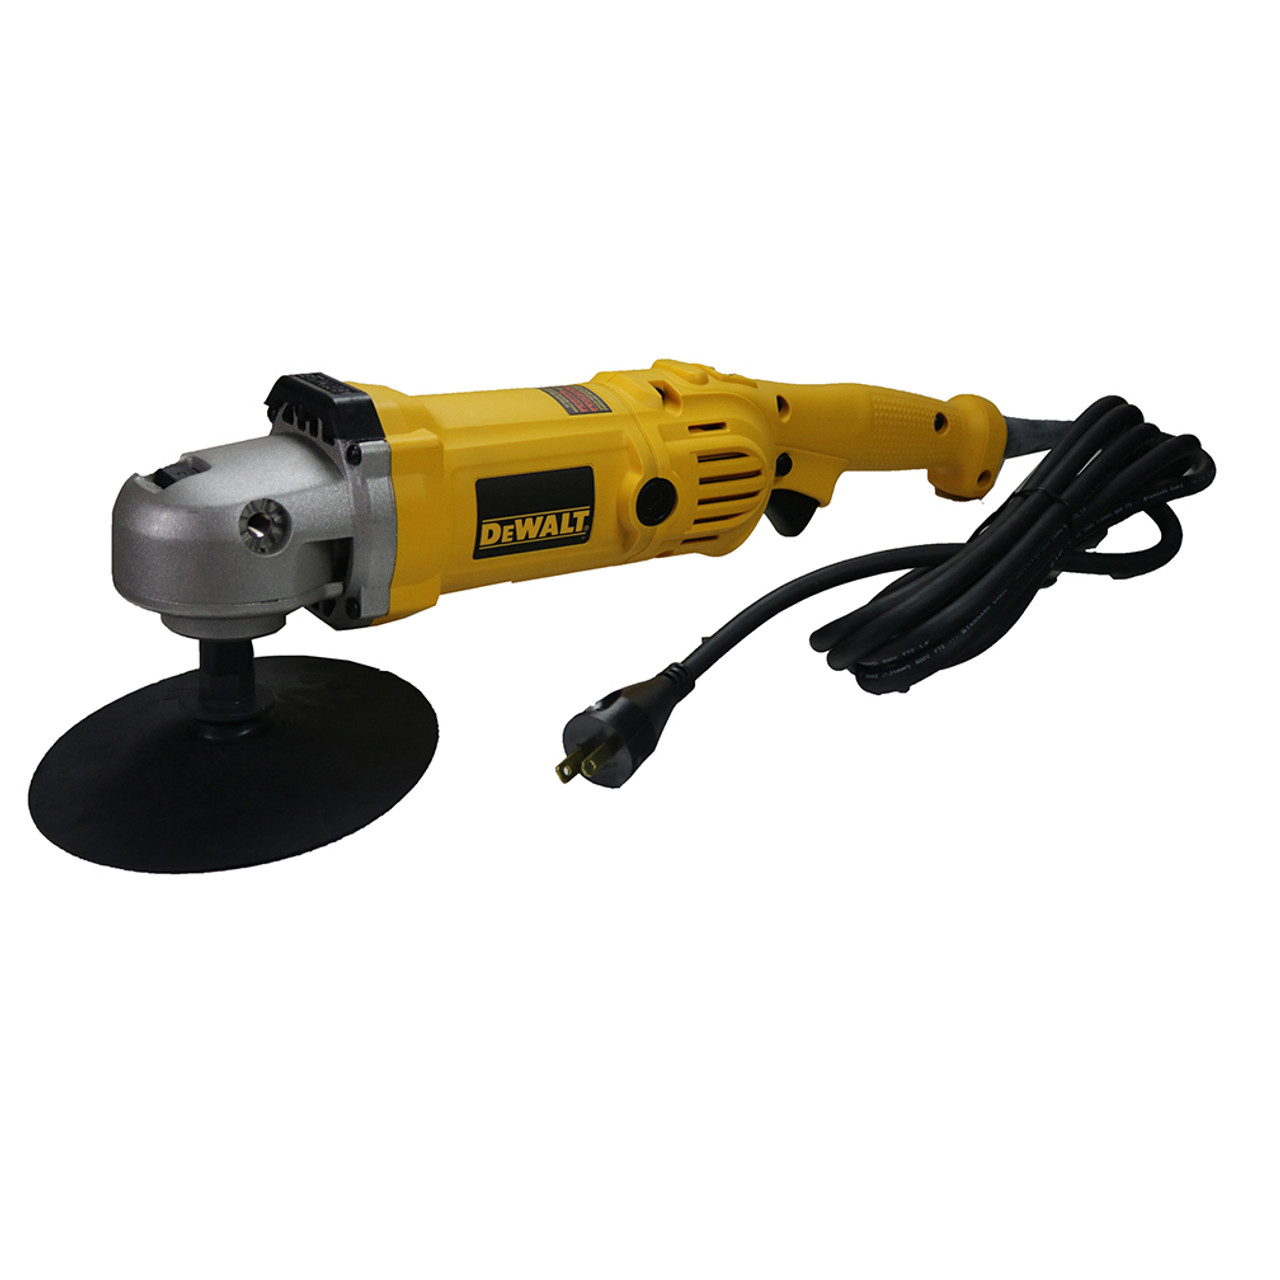 DEWALT Buffer Polisher, 7”-9”, 12 amp, Variable Speed Dial 0-3,500 RPM's,  Corded (DWP849X) Yellow, Large - Power Polishing Tools 